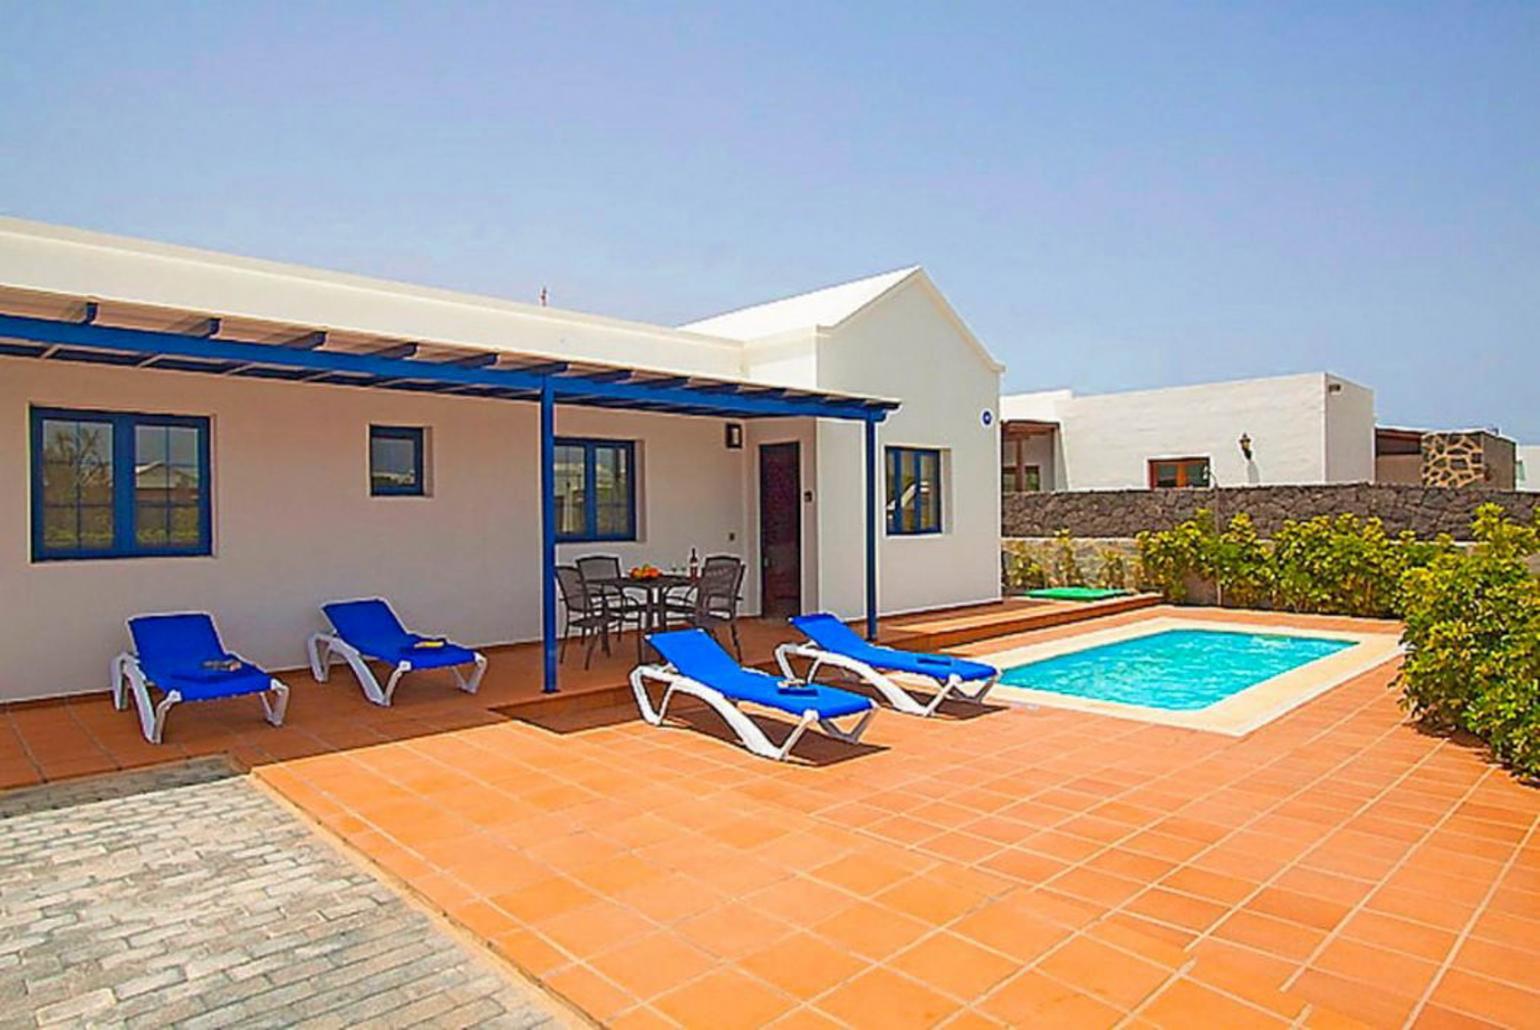 Beautiful villa with private pool and terrace area